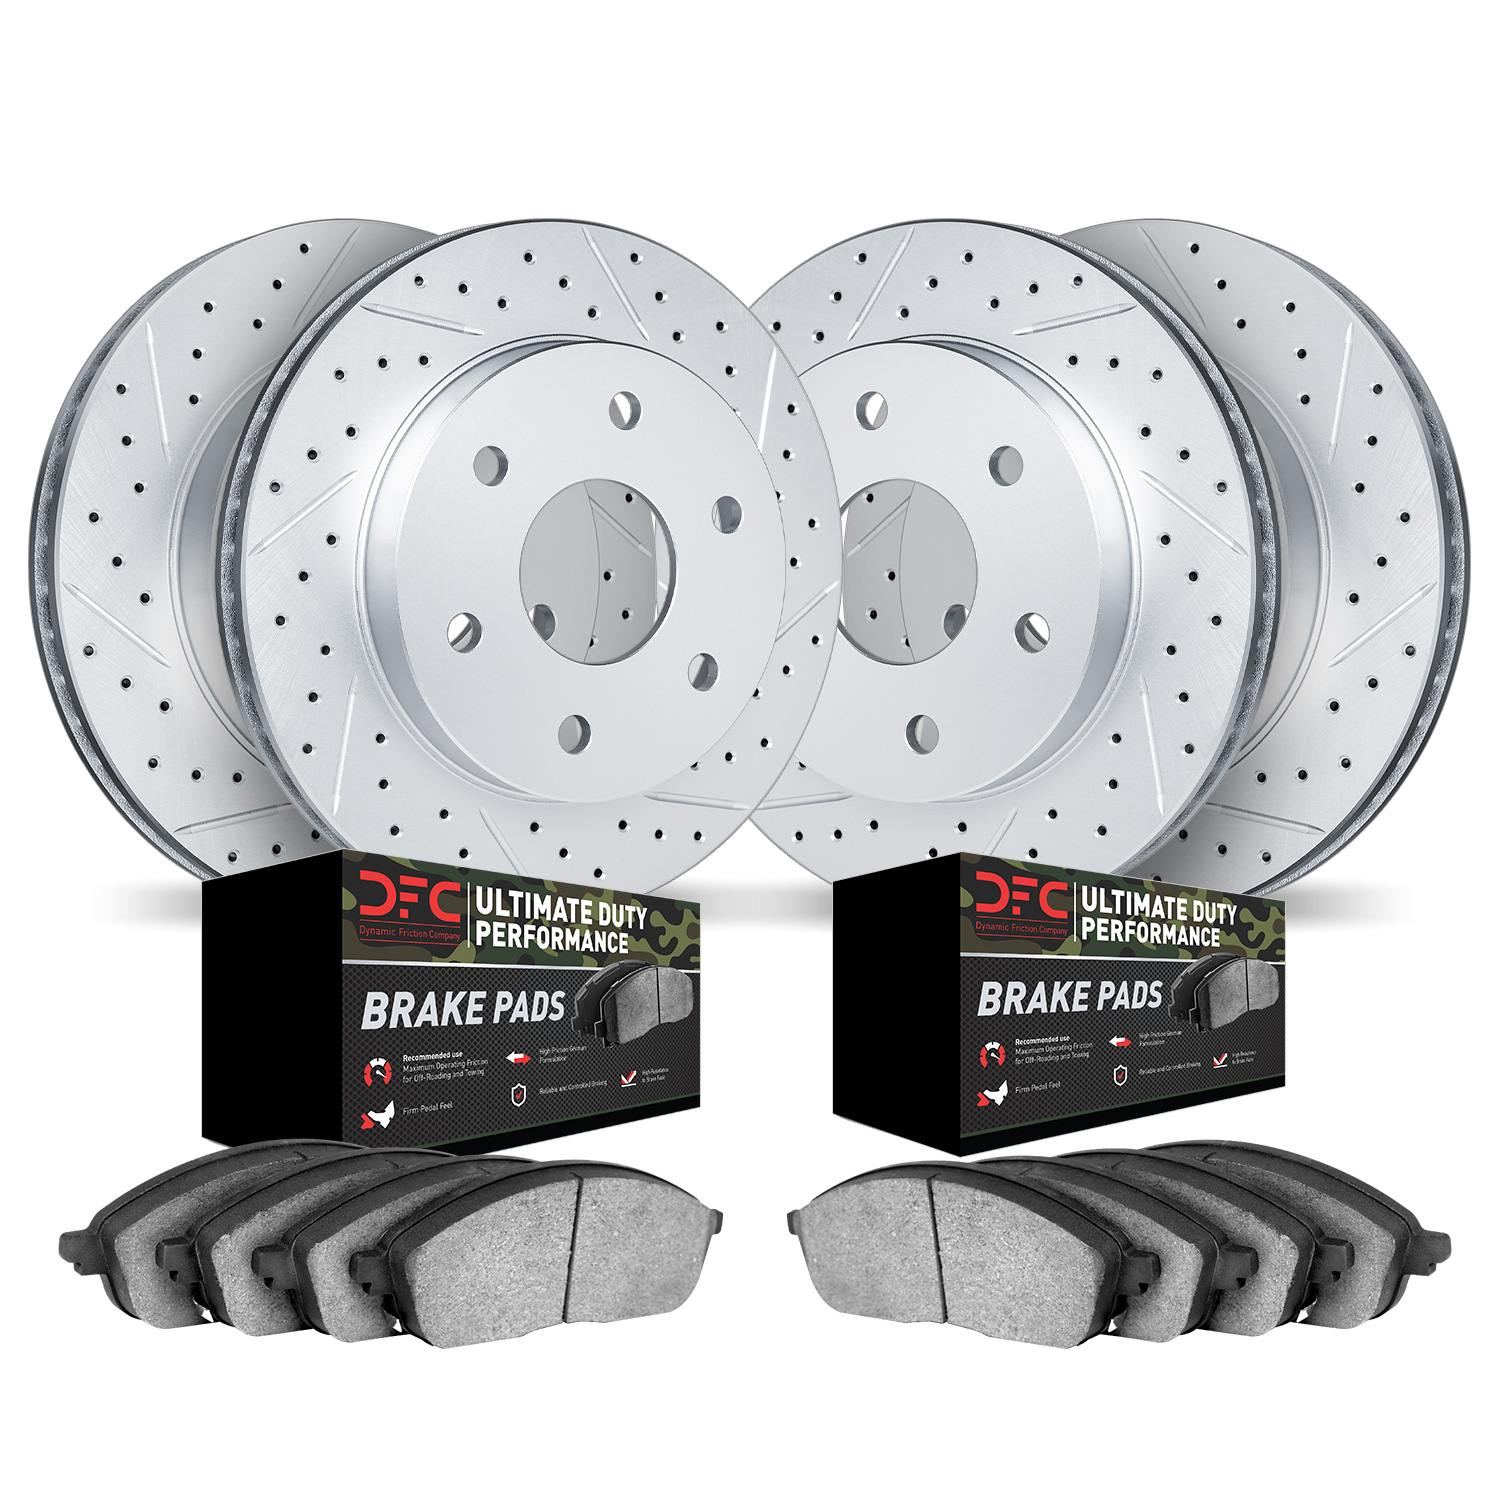 2404-40008 Geoperformance Drilled/Slotted Brake Rotors with Ultimate-Duty Brake Pads Kit, Fits Select Mopar, Position: Front and